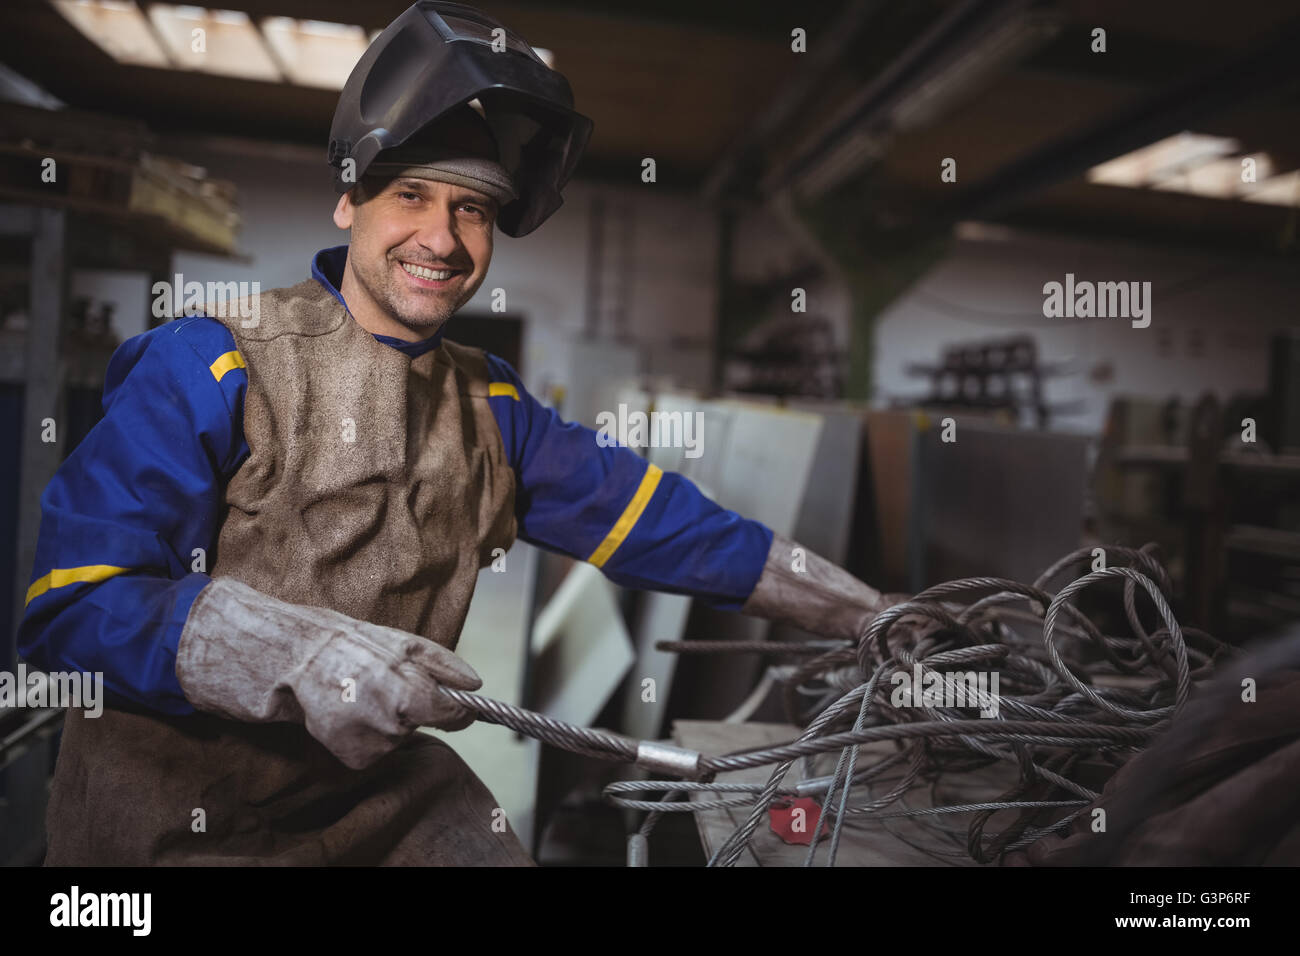 Portrait of smiling man working on a metal work Stock Photo